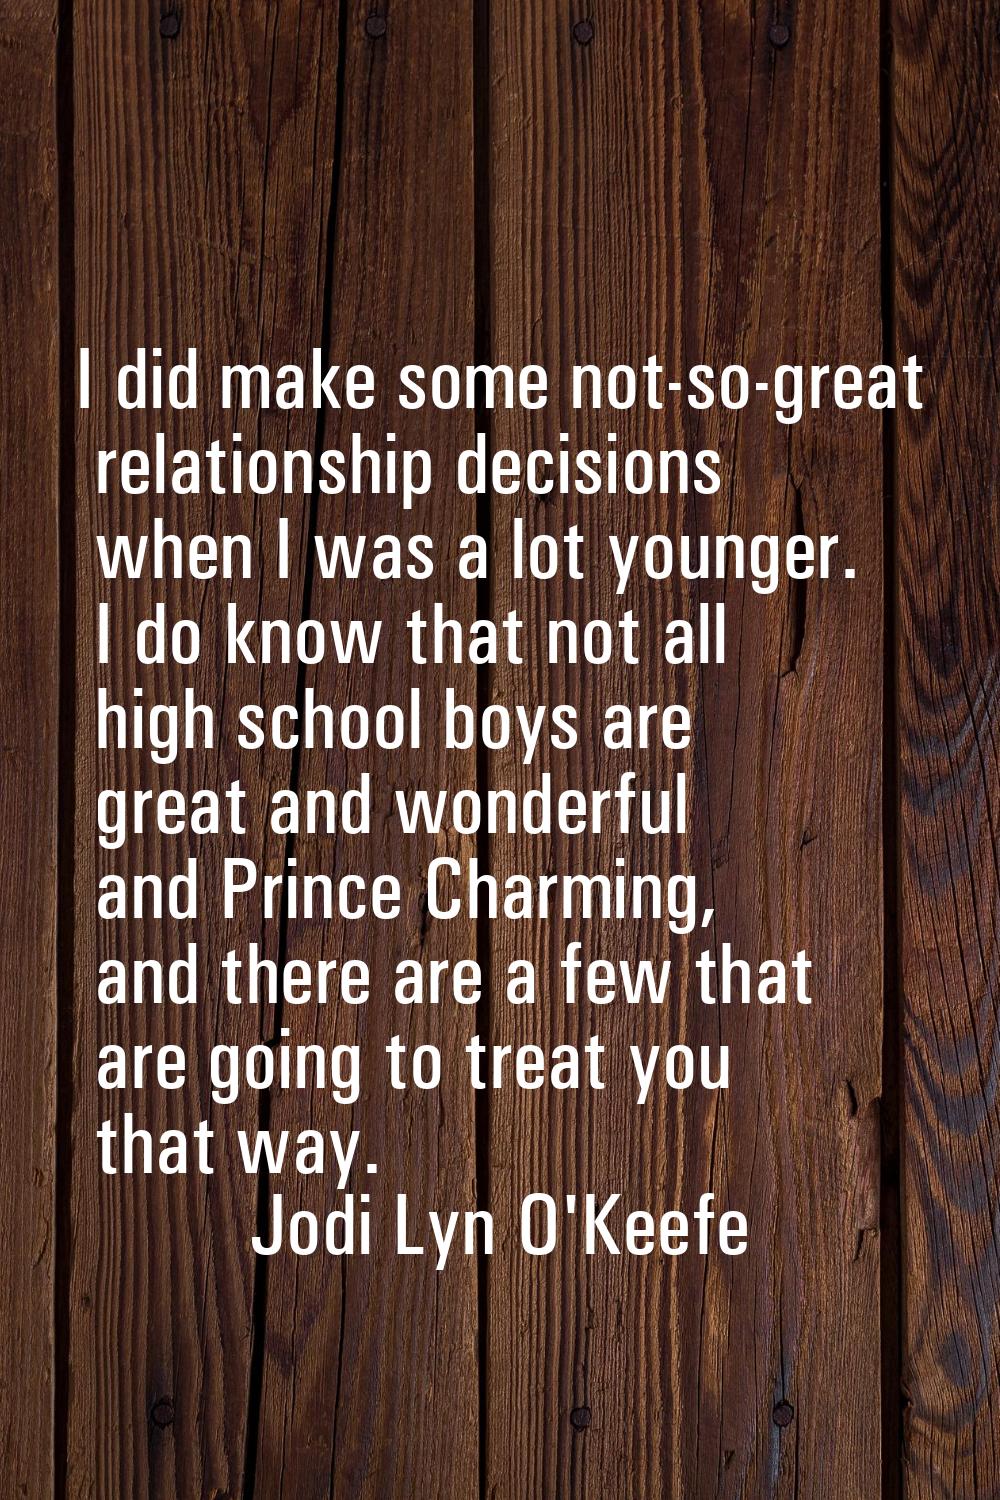 I did make some not-so-great relationship decisions when I was a lot younger. I do know that not al